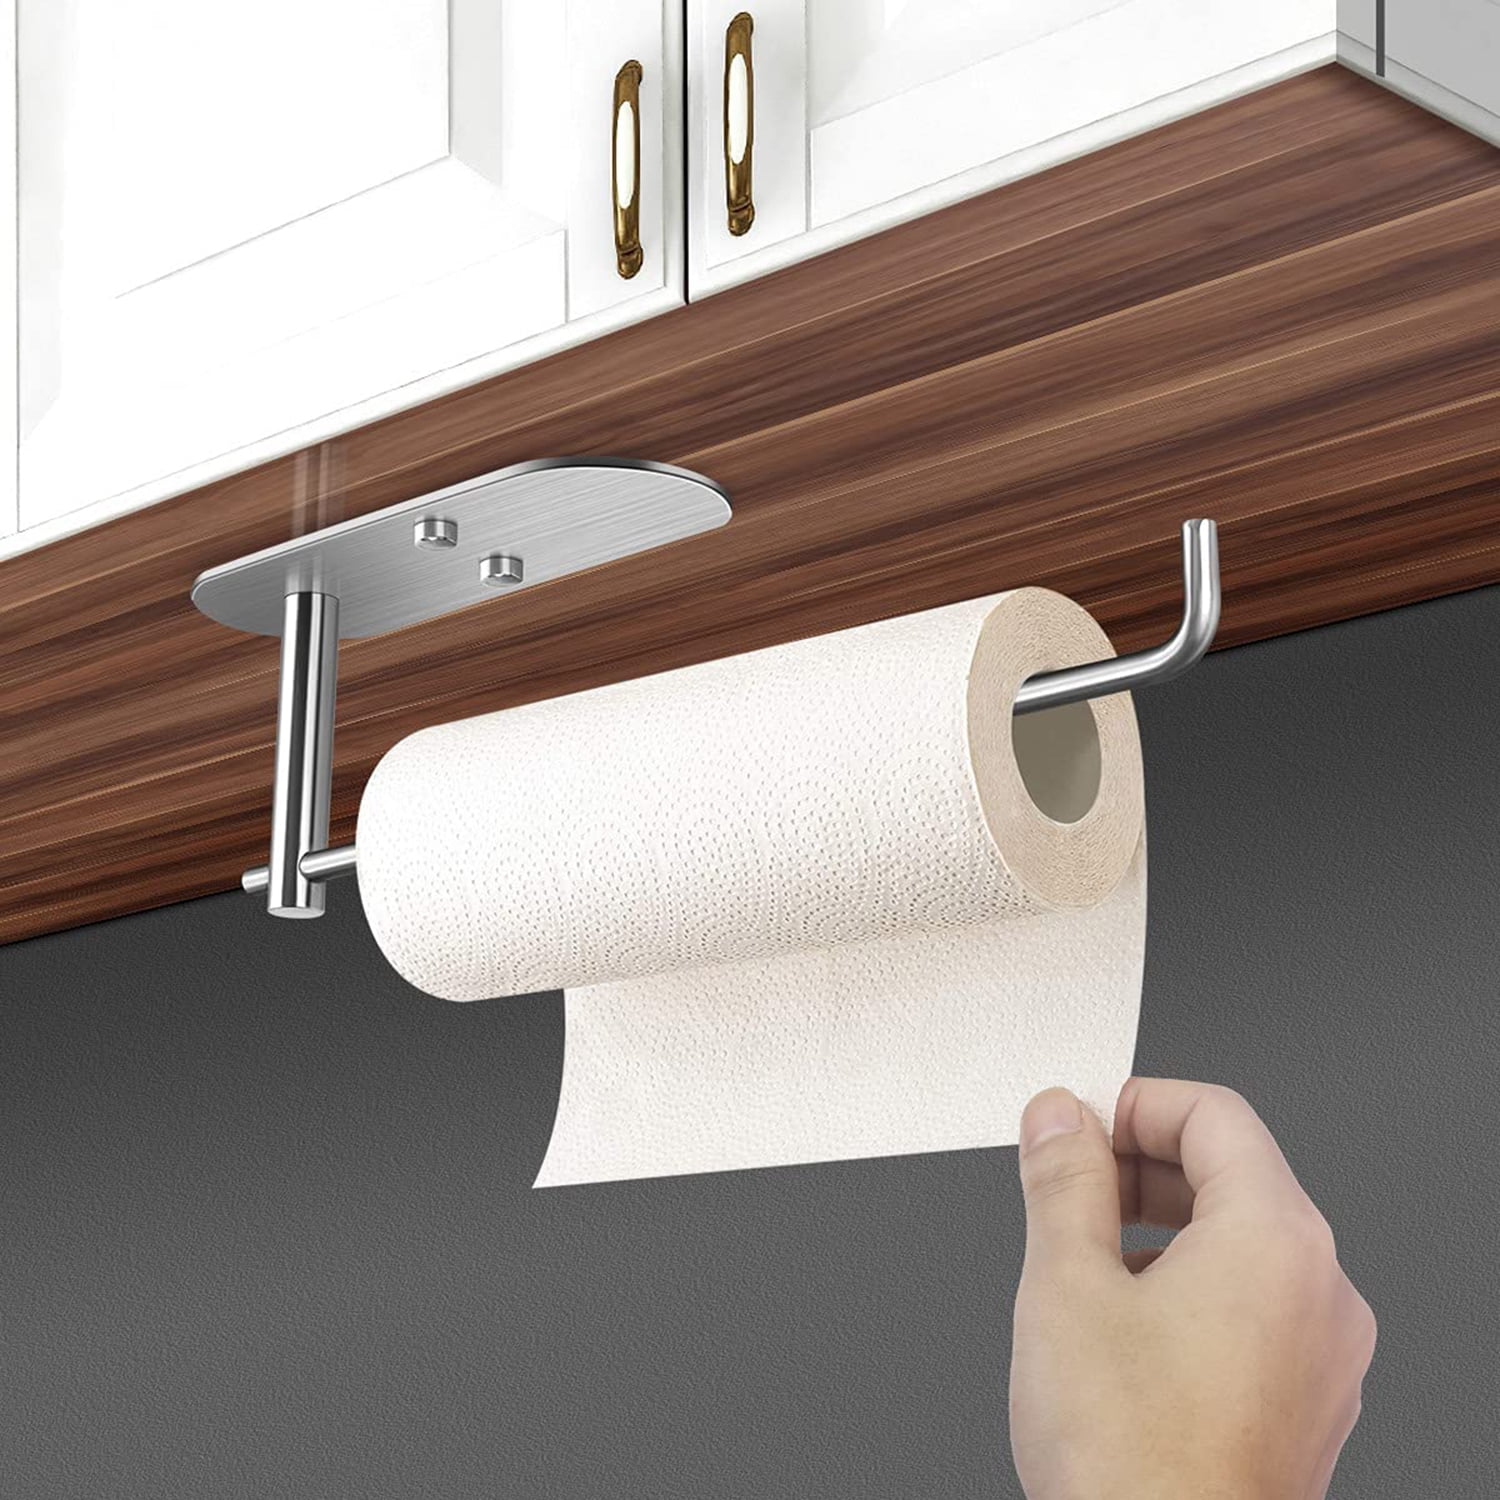 TONLEA Under Cabinet Paper Towel Holder - Wall Mount Kitchen Paper Towel  Rack with 3M Self-Adhesive or Drilling Option - Perfect for Pantry, Sink